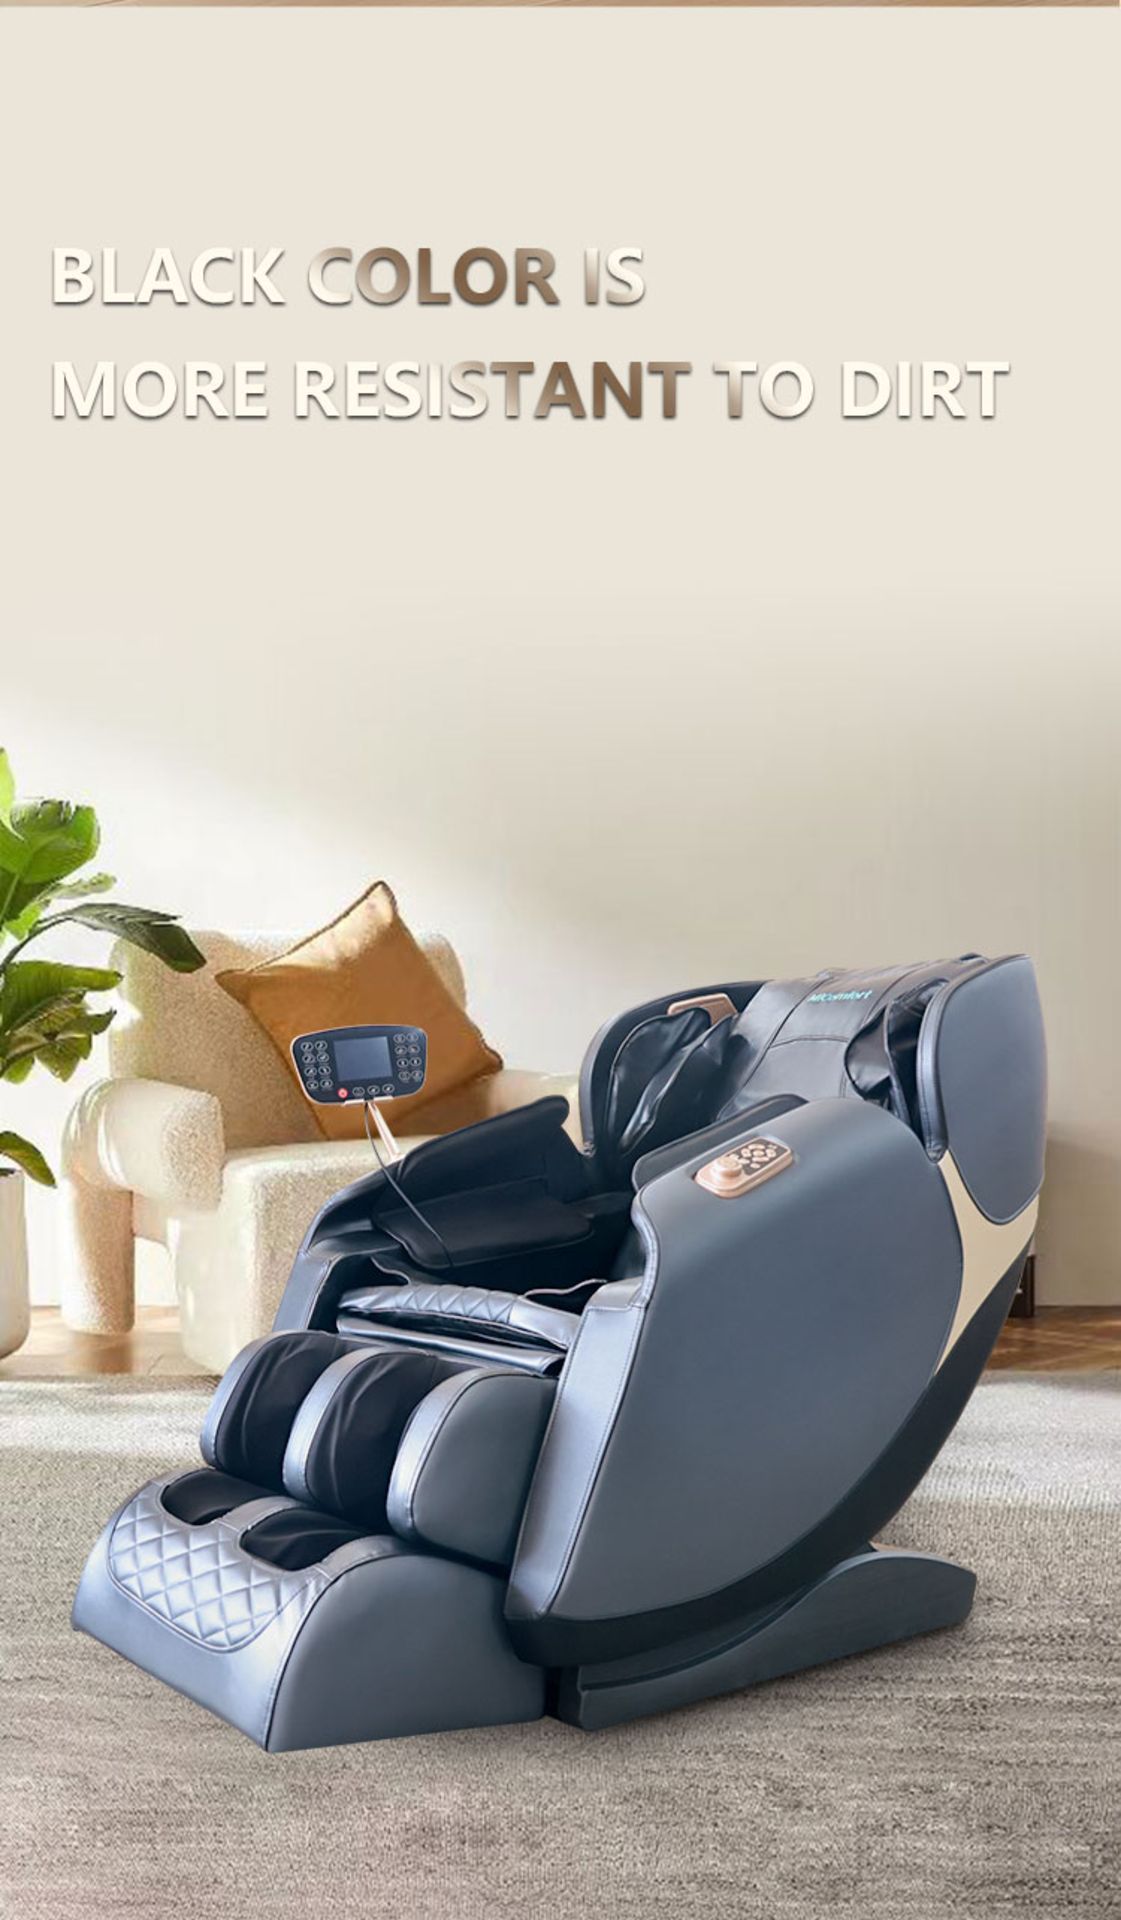 Brand New in Box Orchid Blue/Black MiComfort Full Body Massage Chair RRP £2199 *NO VAT* - Image 13 of 14